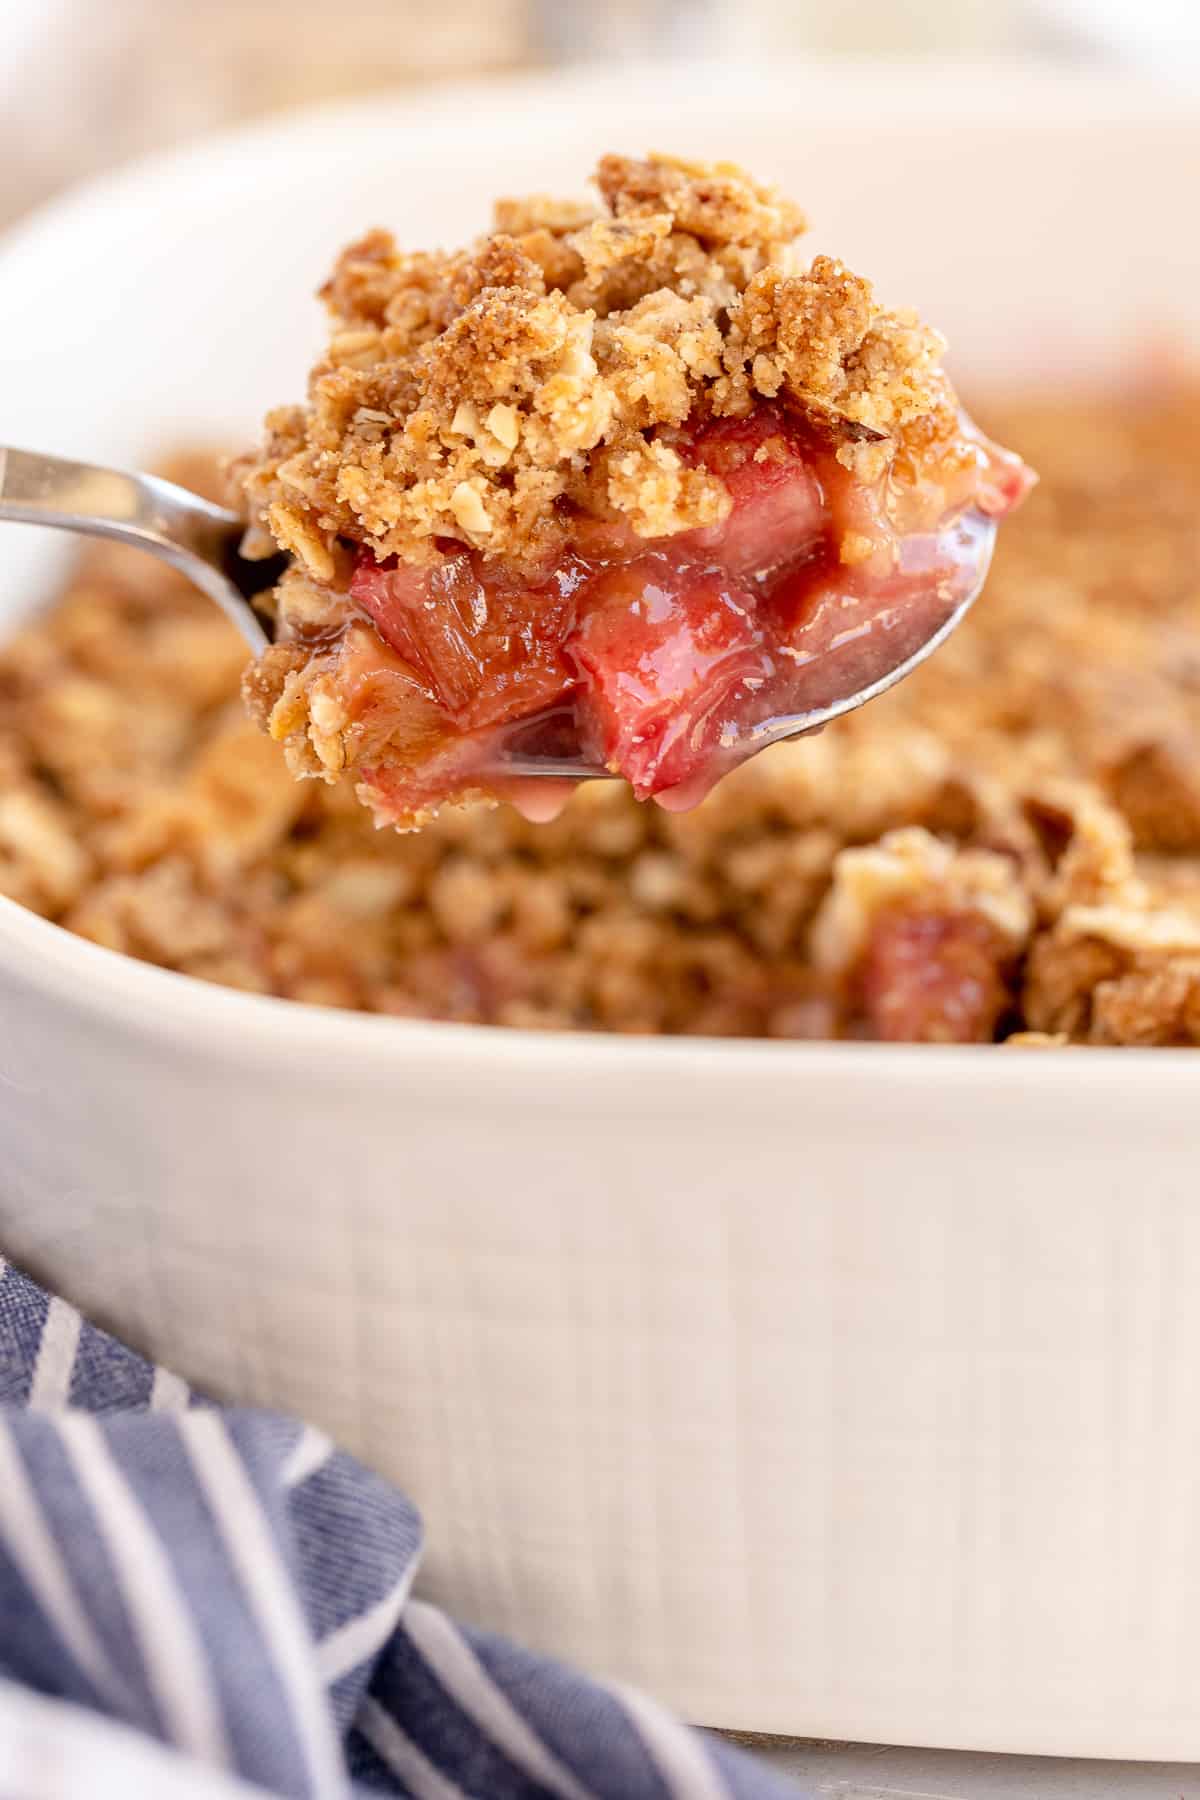 A spoon scooping Rhubarb Crisp from a white baking dish.